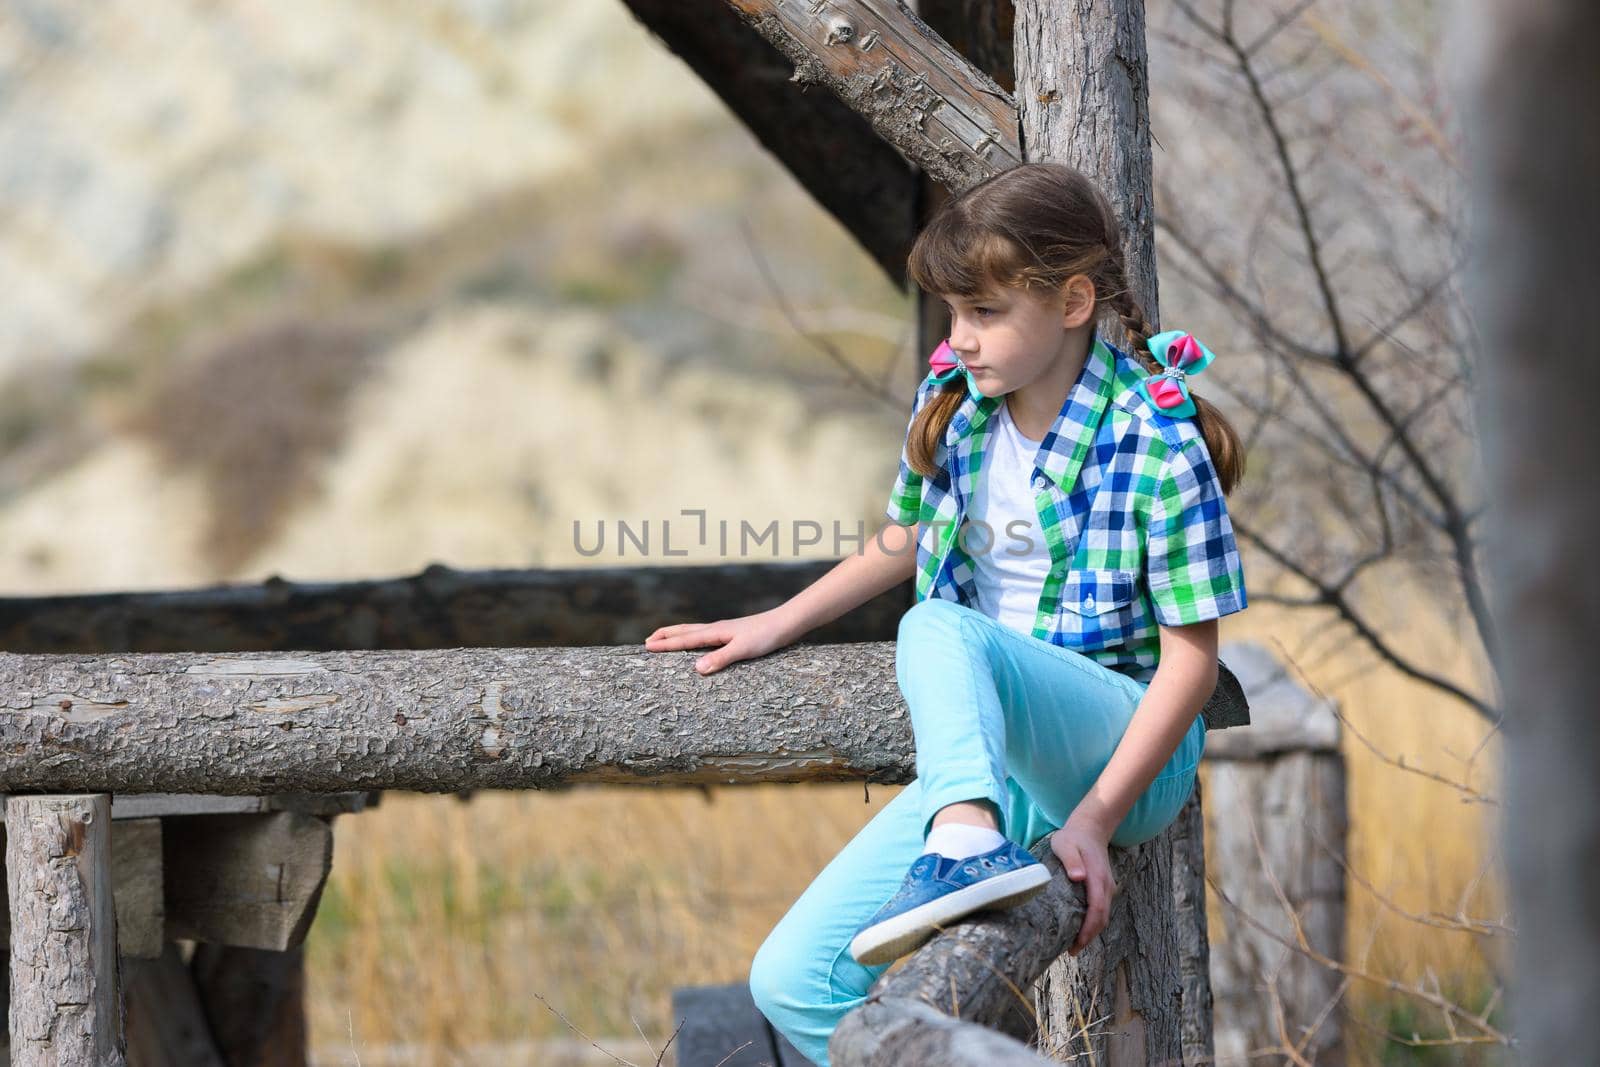 A girl tries to sit on a fence made of a thick wooden frame